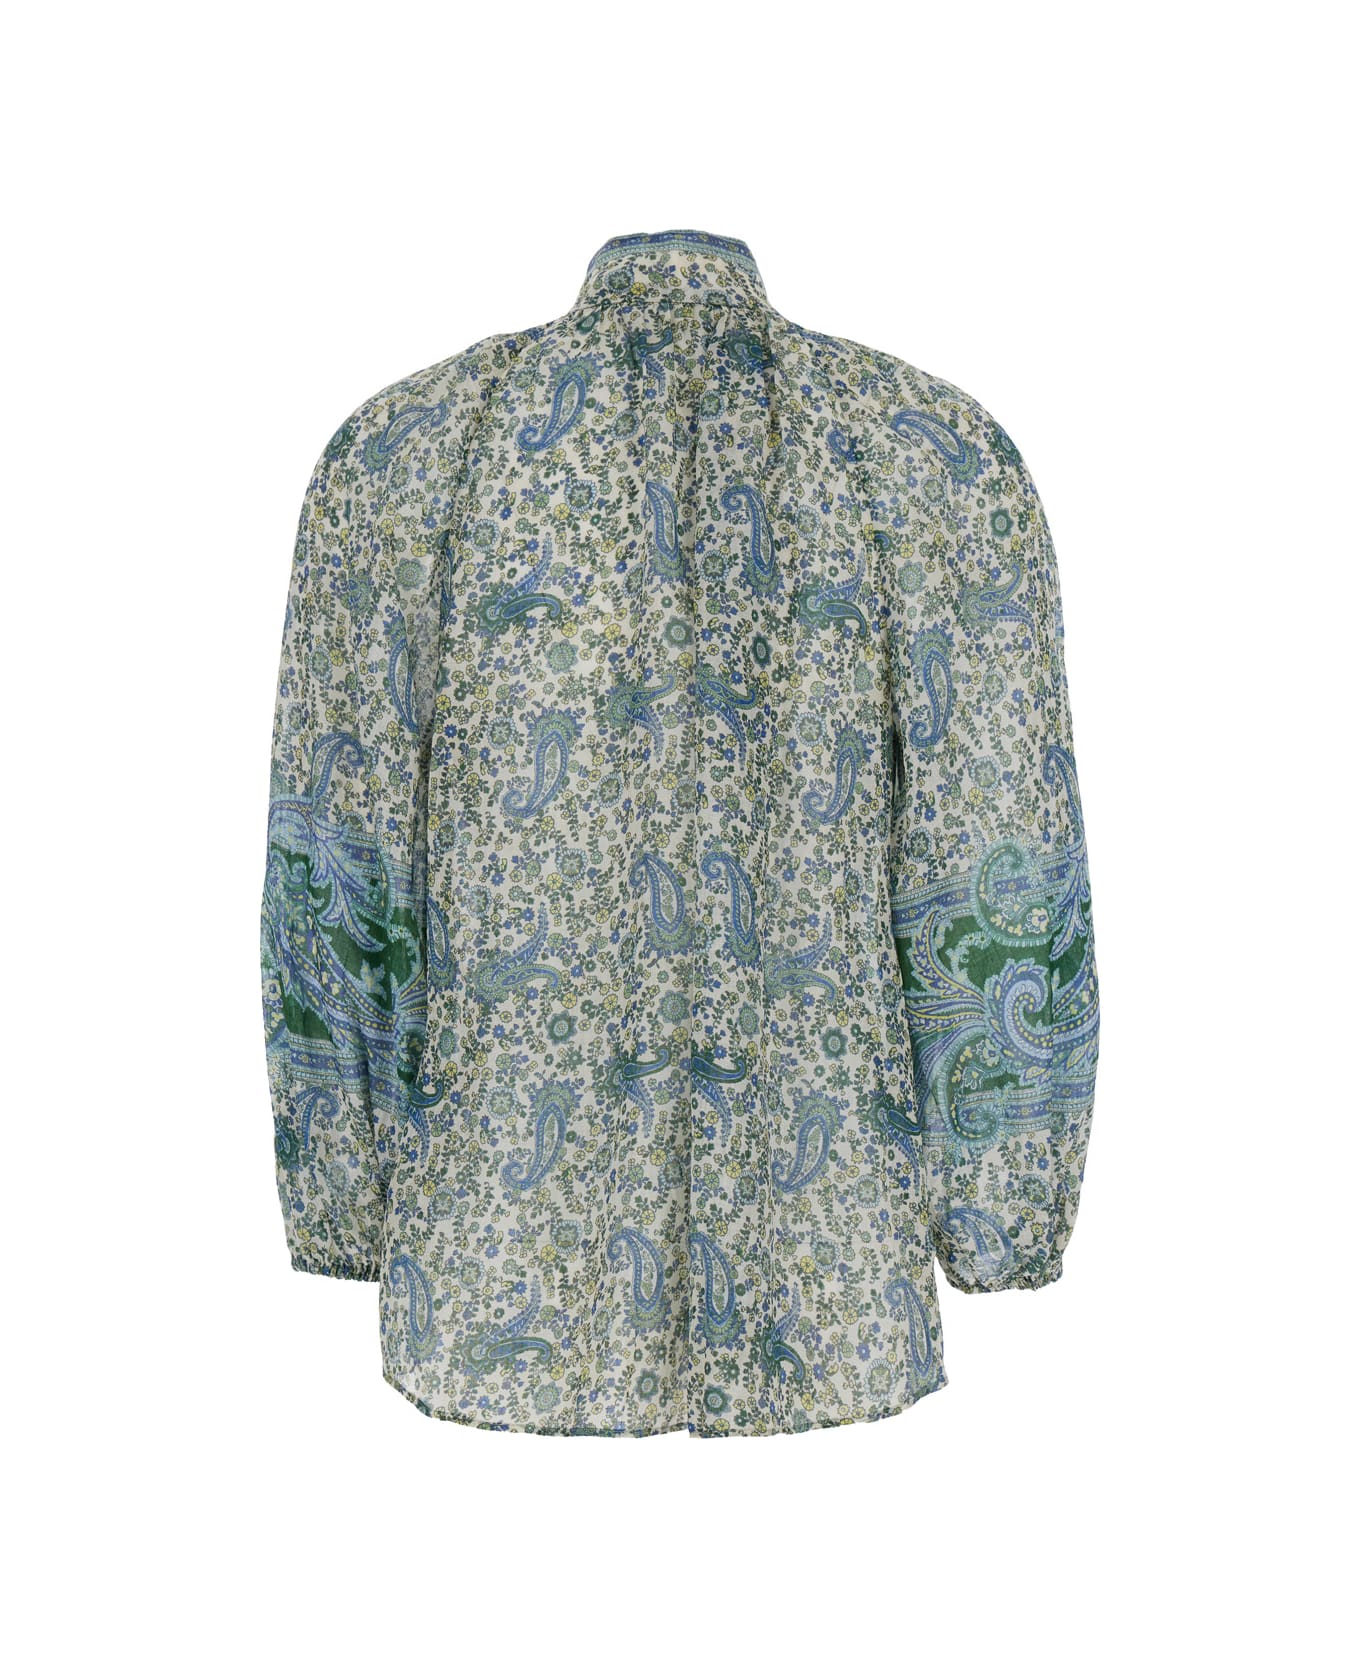 Zimmermann Multicolor Blouse With Embroidery And Puffed Sleeves In Eco Silk Woman - Multicolor ブラウス